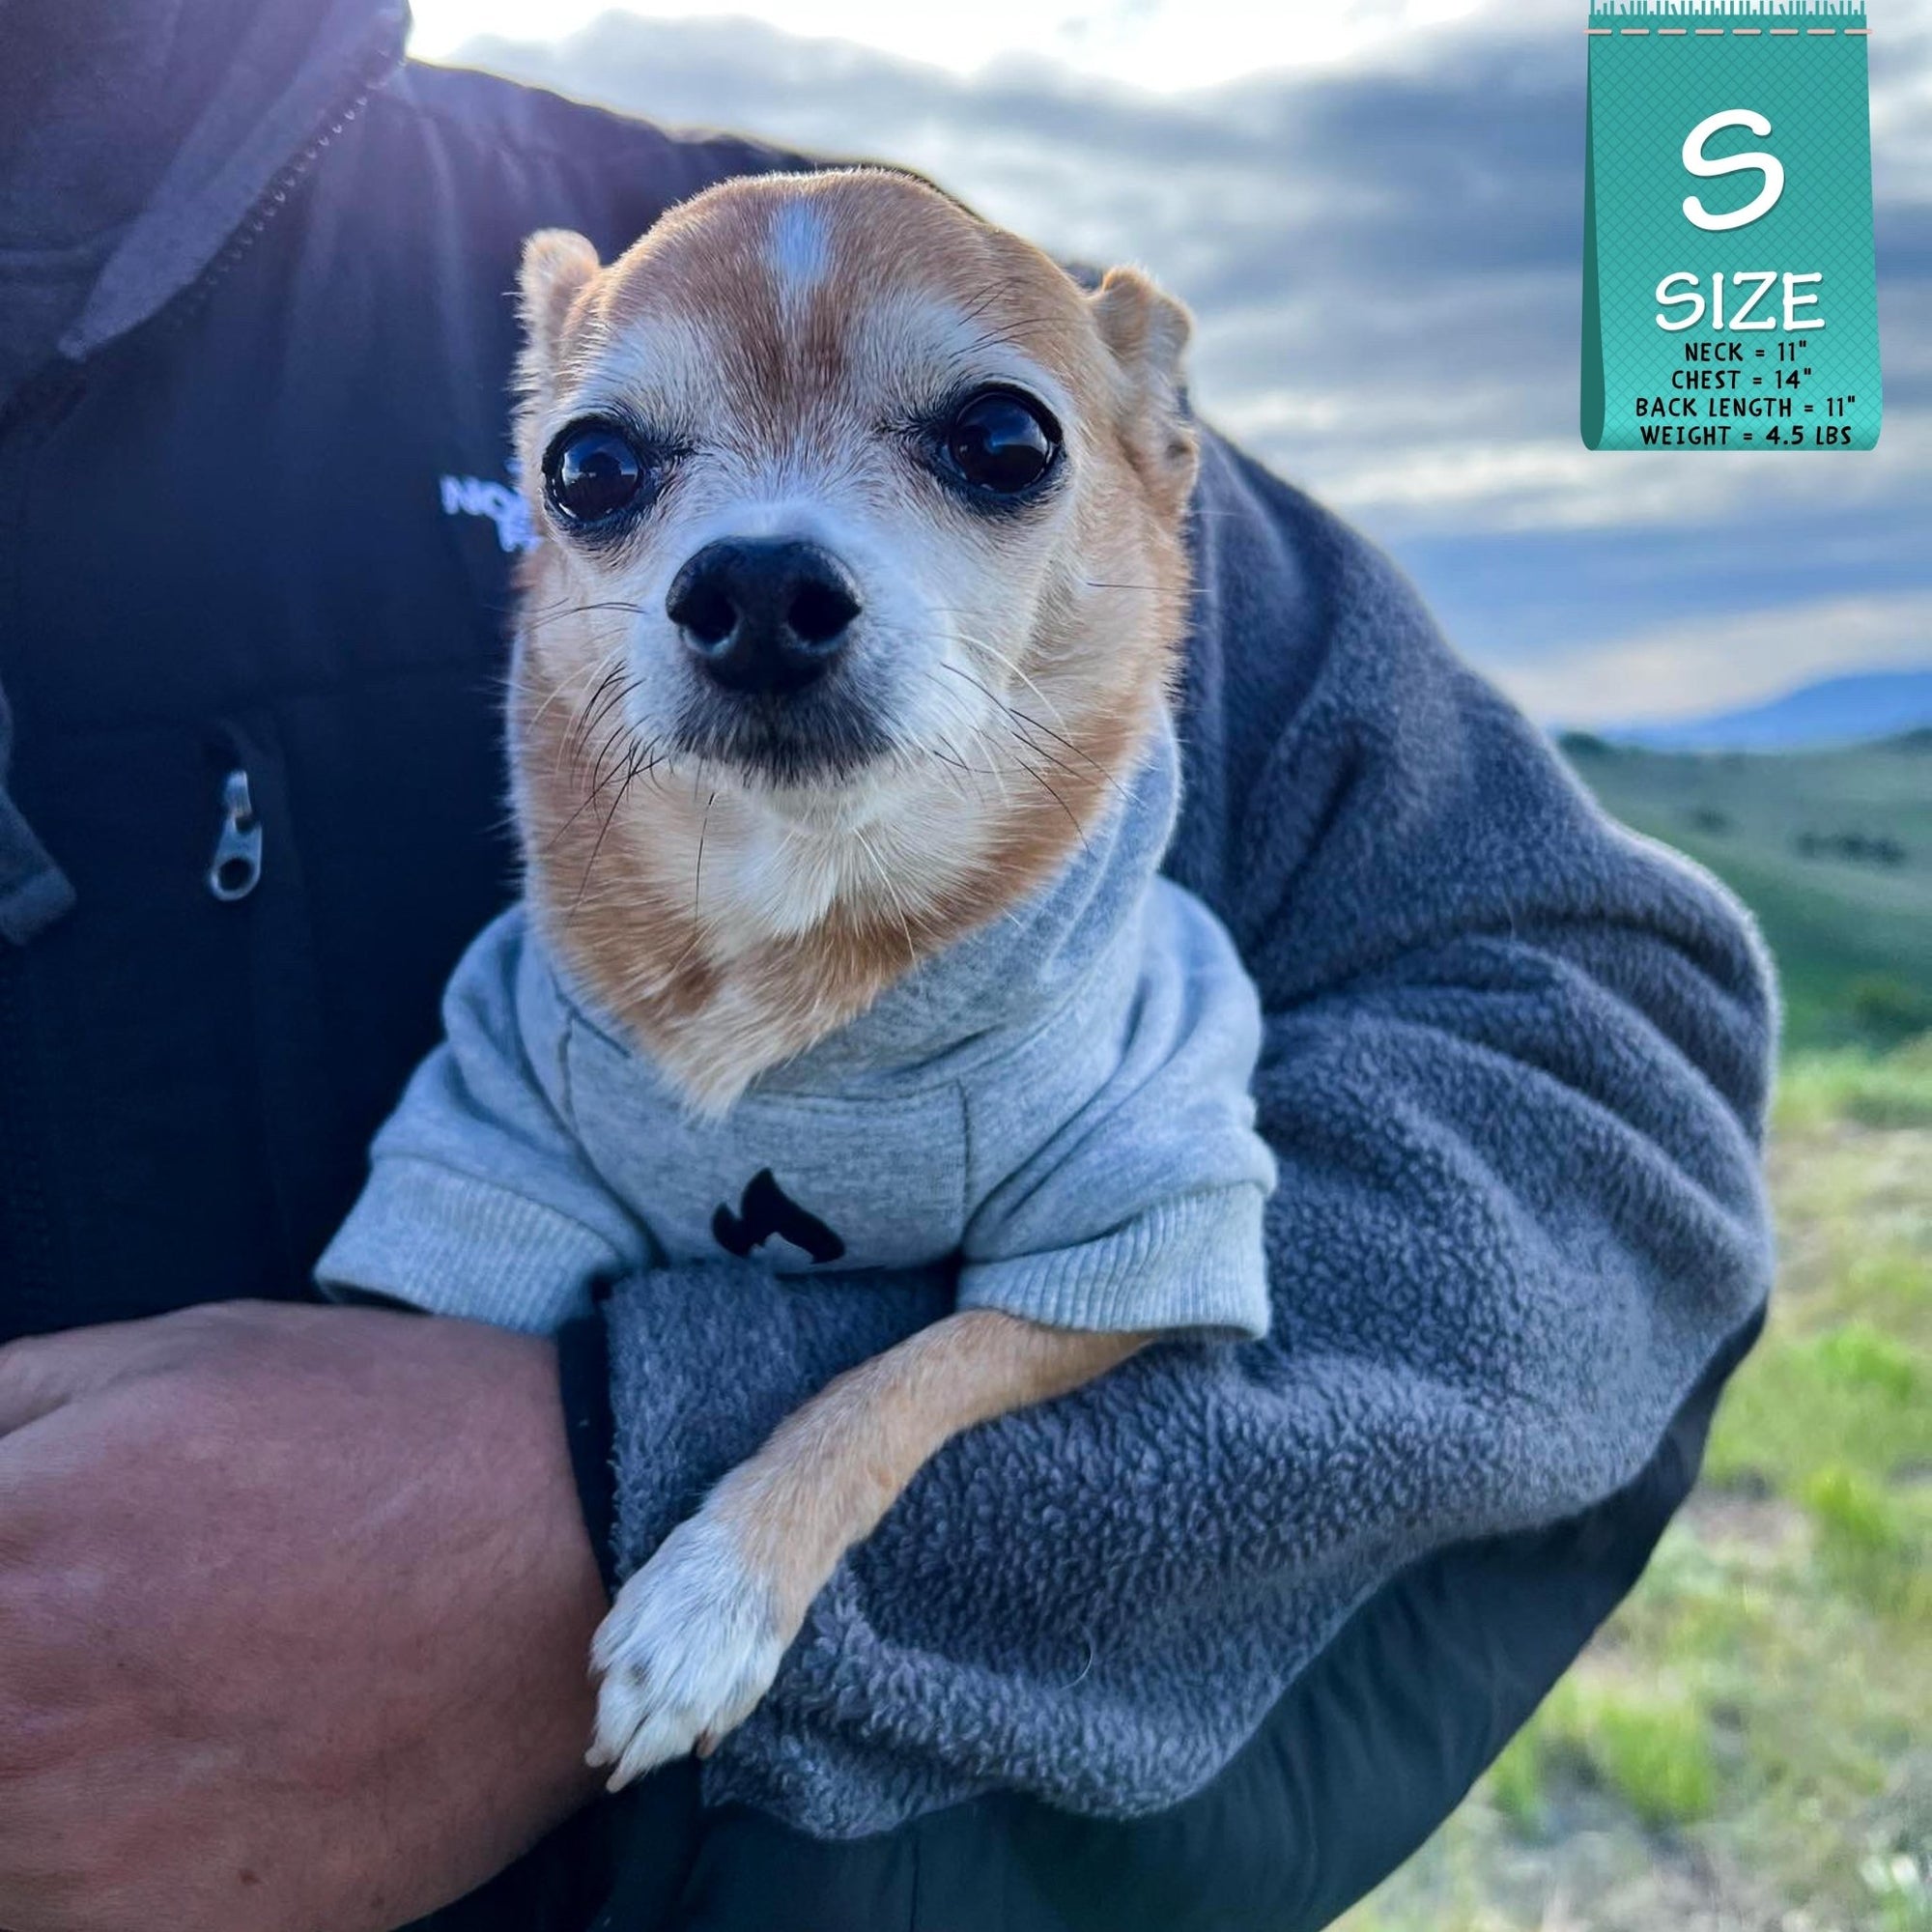 Dog Hoodie - Hoodies For Dogs - Chihuahua wearing &quot;Happy Camper&quot; dog hoodie in gray - campfire emoji on front chest - being held by a human outdoors - Wag Trendz